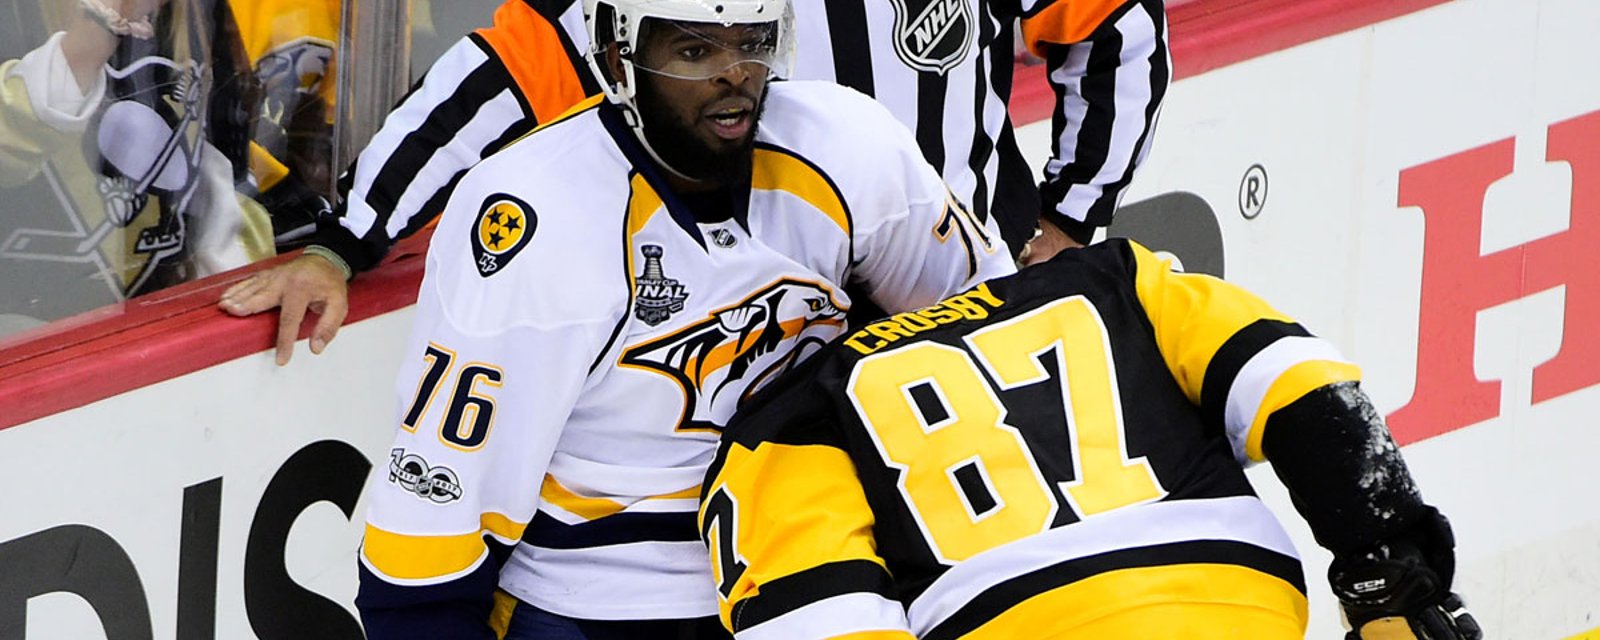 Pens and Preds meet up in Stanley Cup Final rematch 